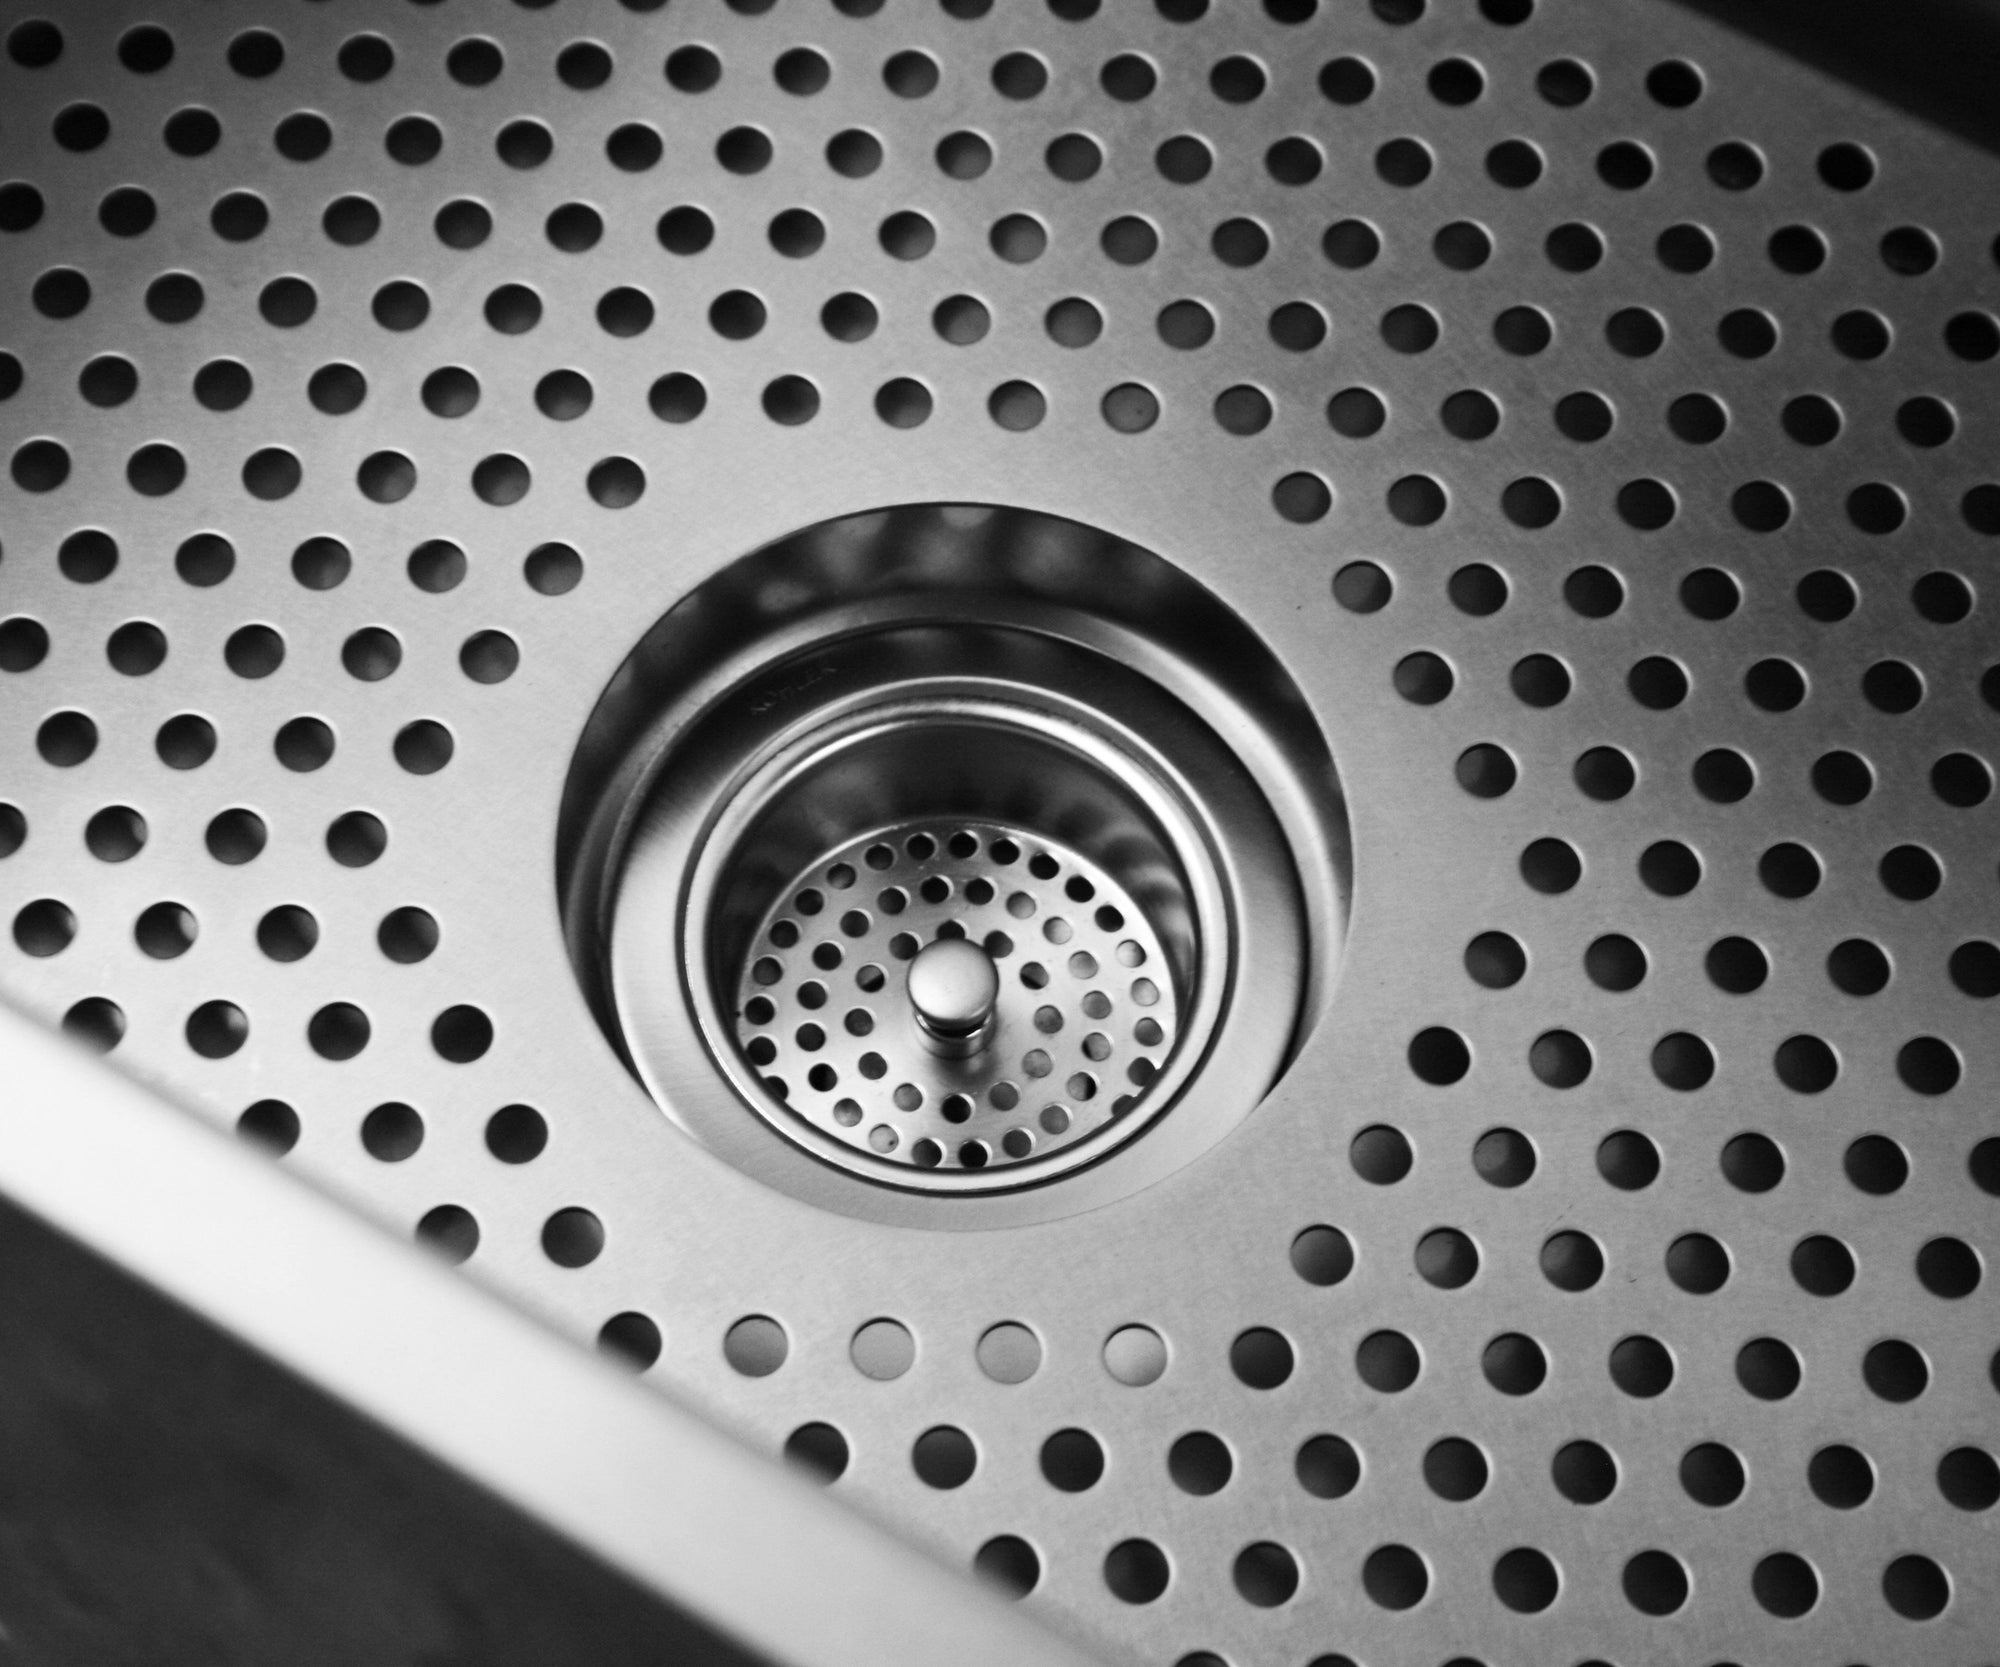 Stainless Steel Sink Basin Grate